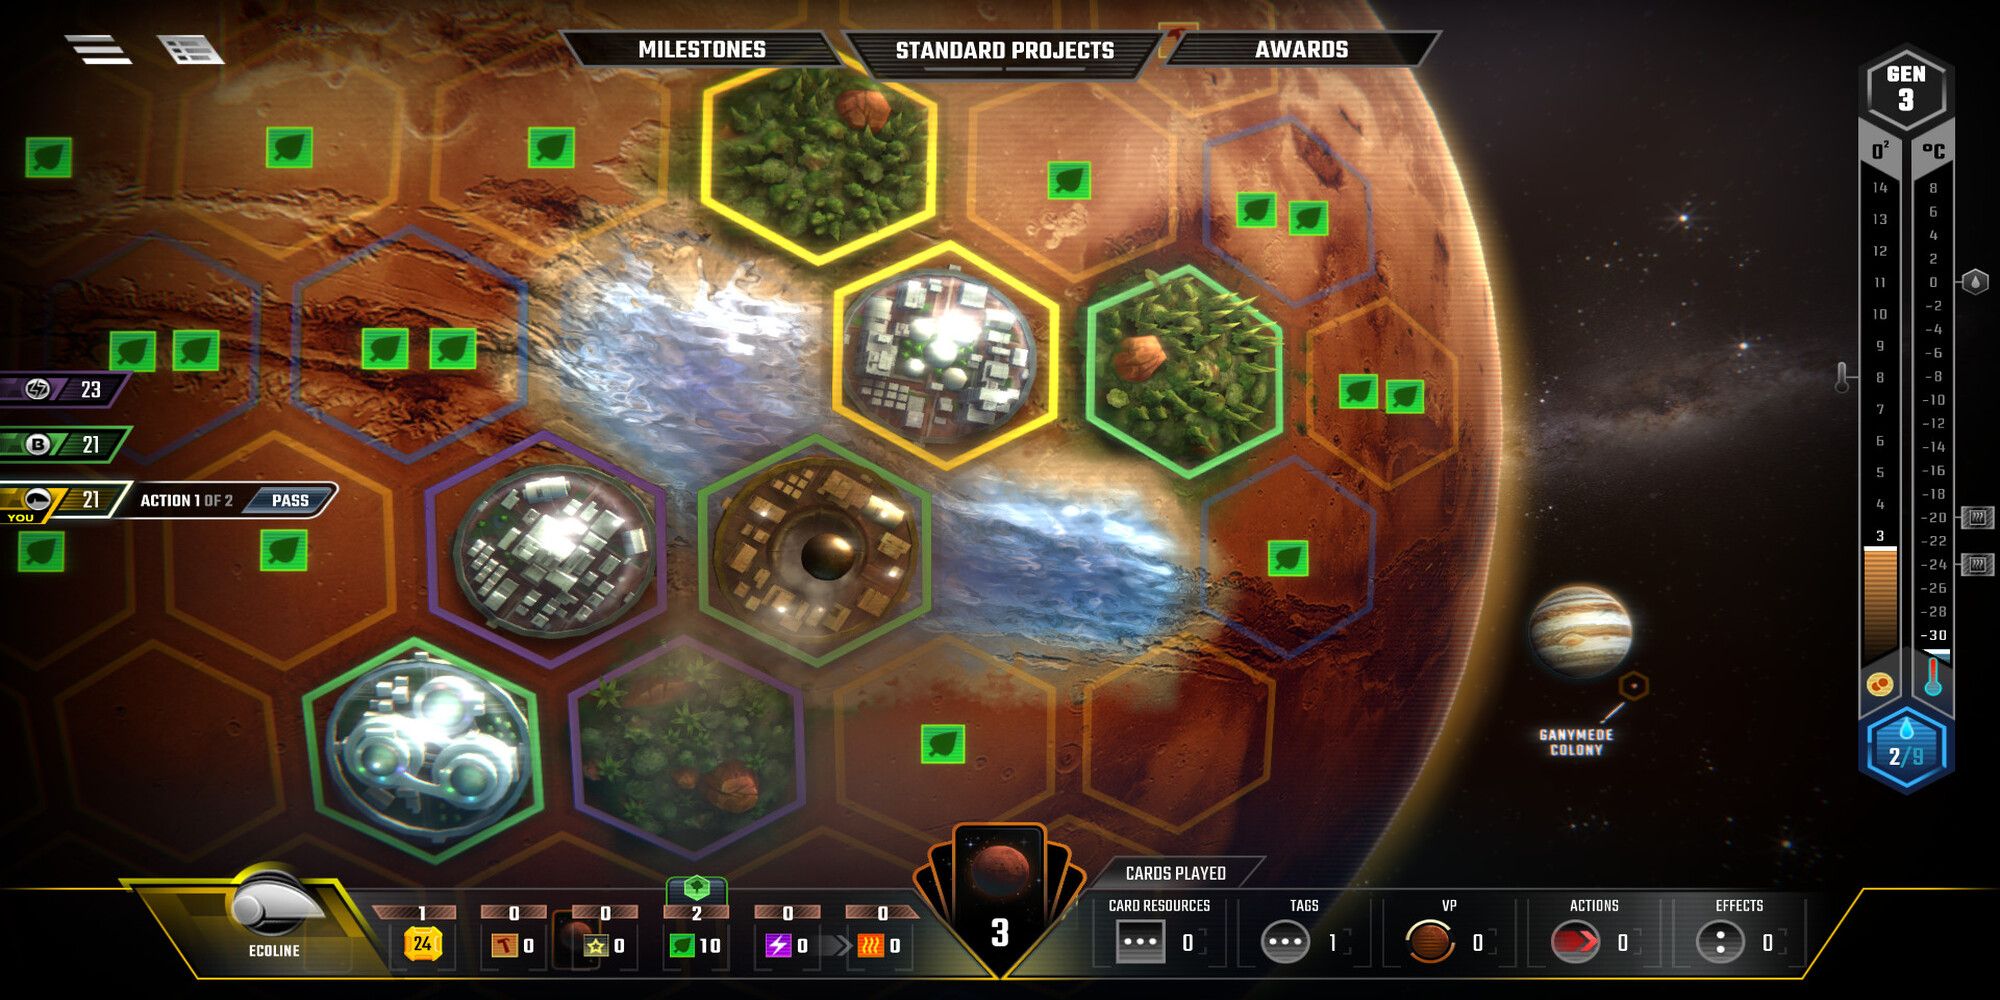 Terraforming Mars in-game screenshot showing the world map grid and various icons